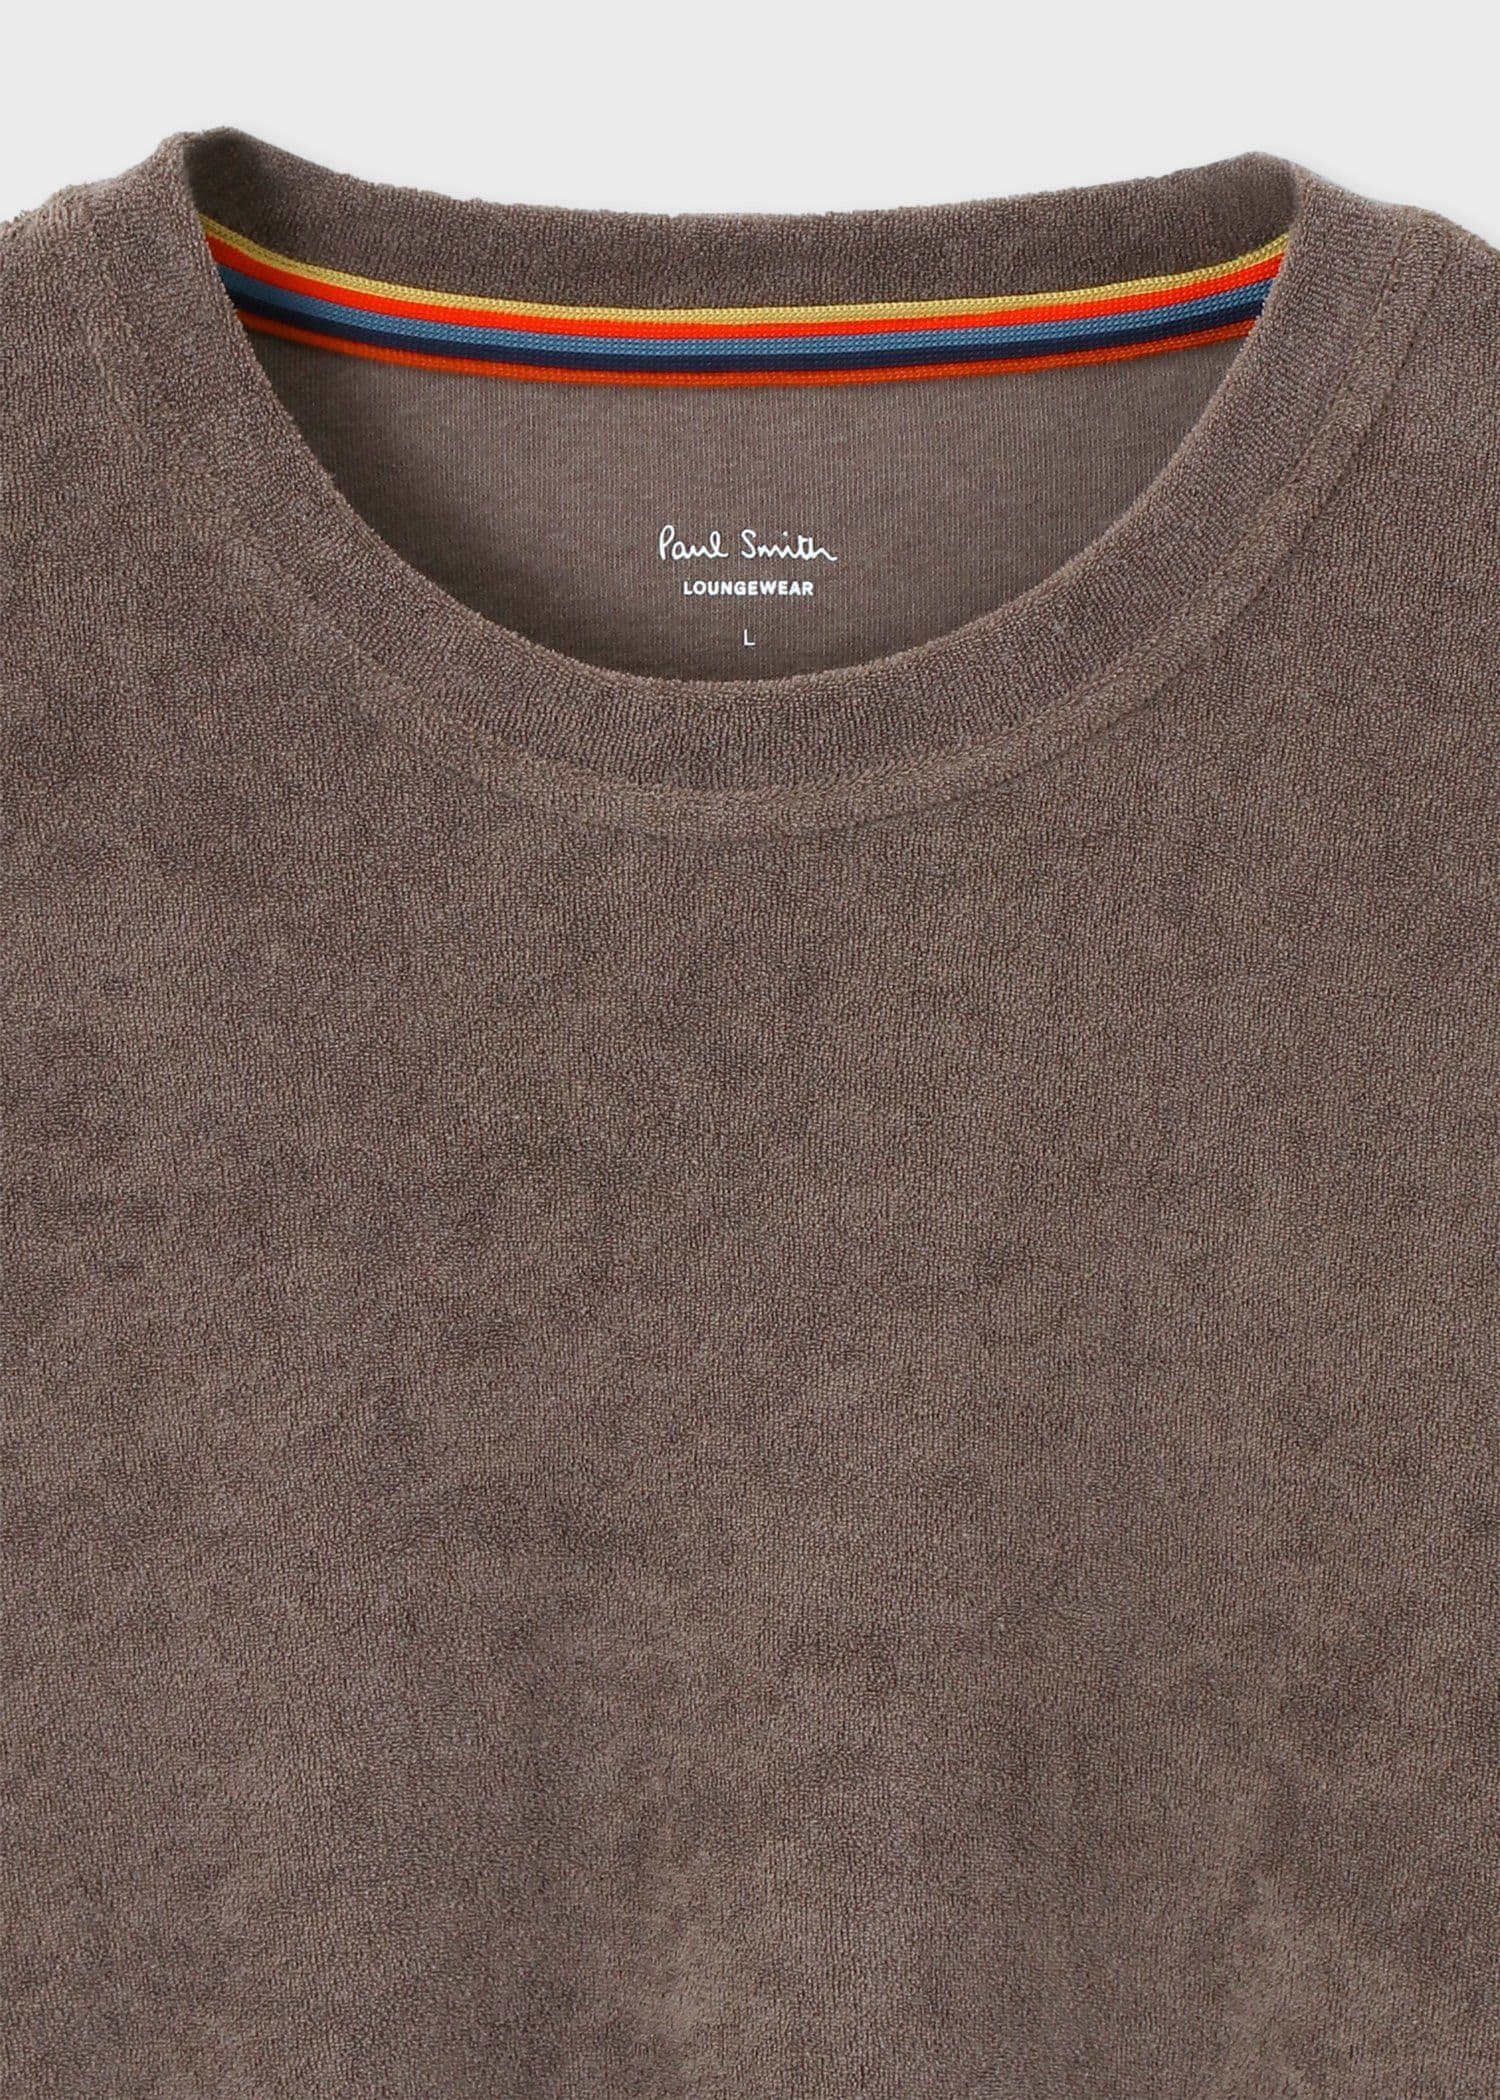 PAUL SMITH COLLECTION マフラー - 茶x黒(総柄)